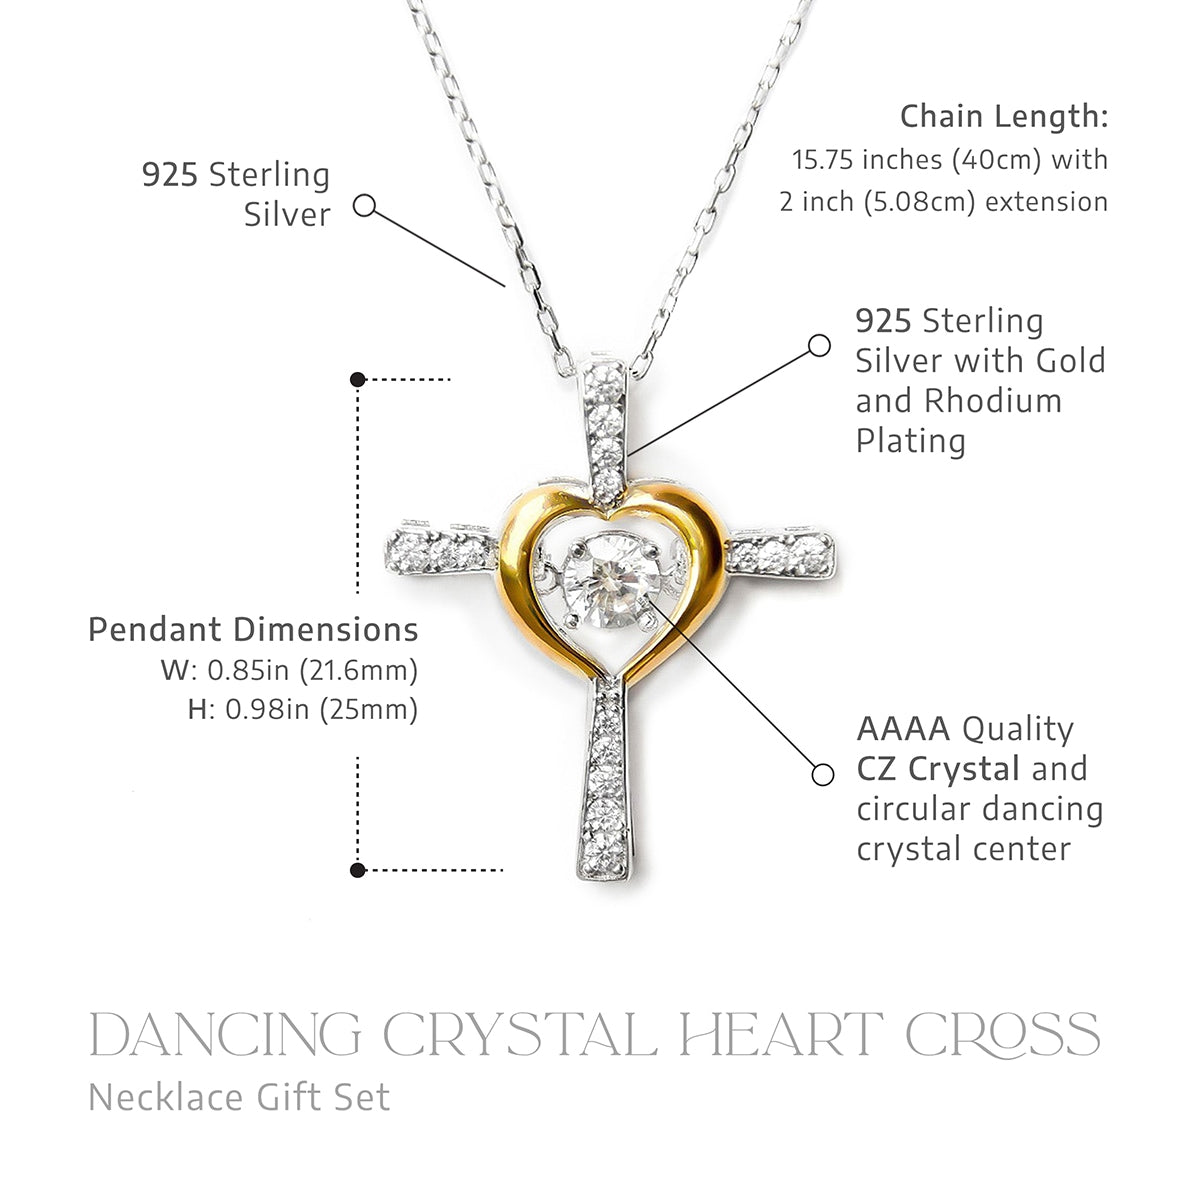 To My Amazing Mom - Dancing Crystal Heart Cross Necklace Gift Set